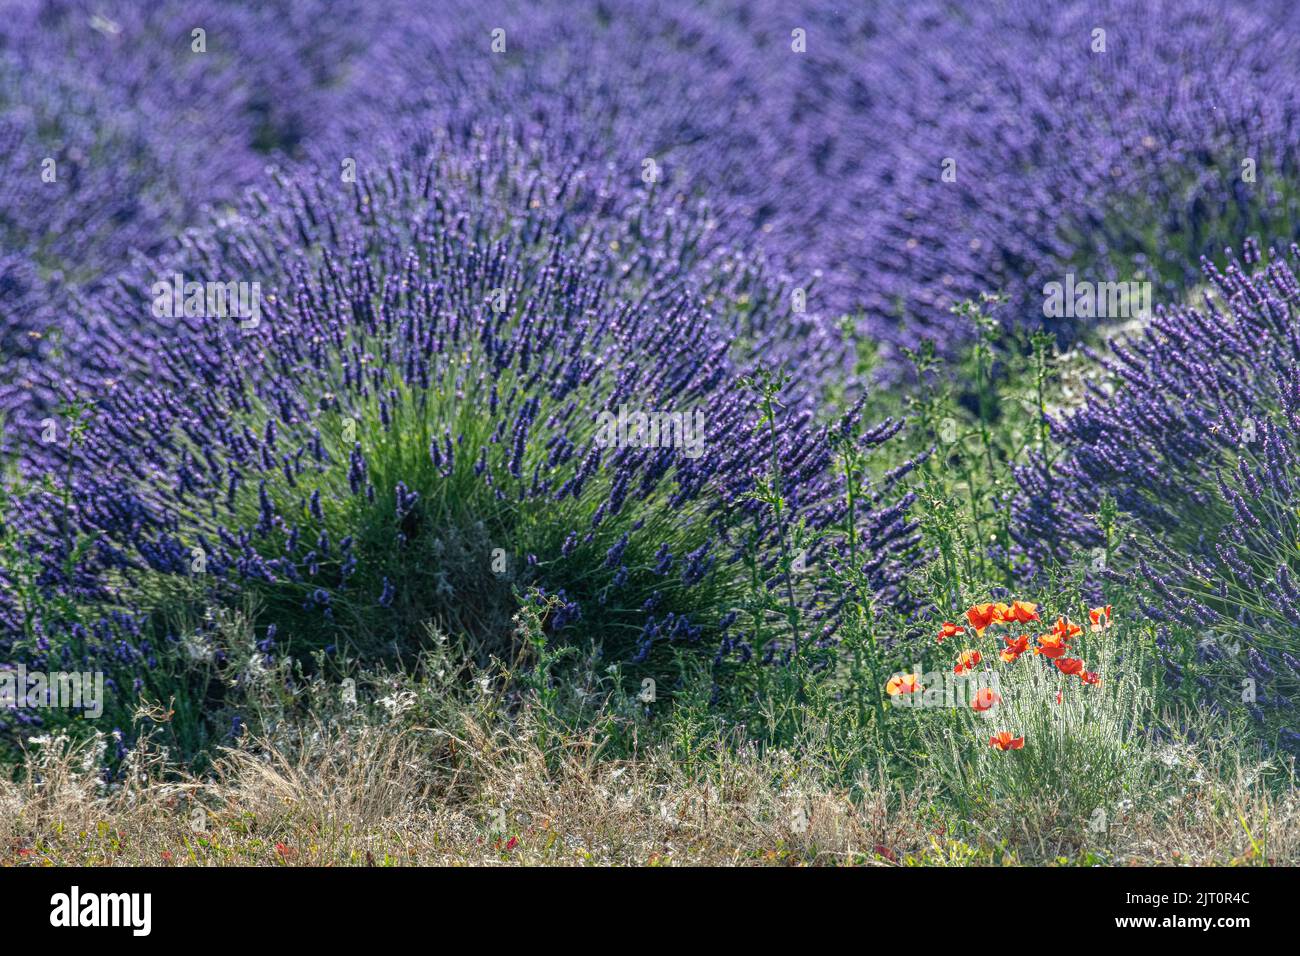 Some wild poppies in amongst fields of lavender in Kent, awaiting harvest Stock Photo